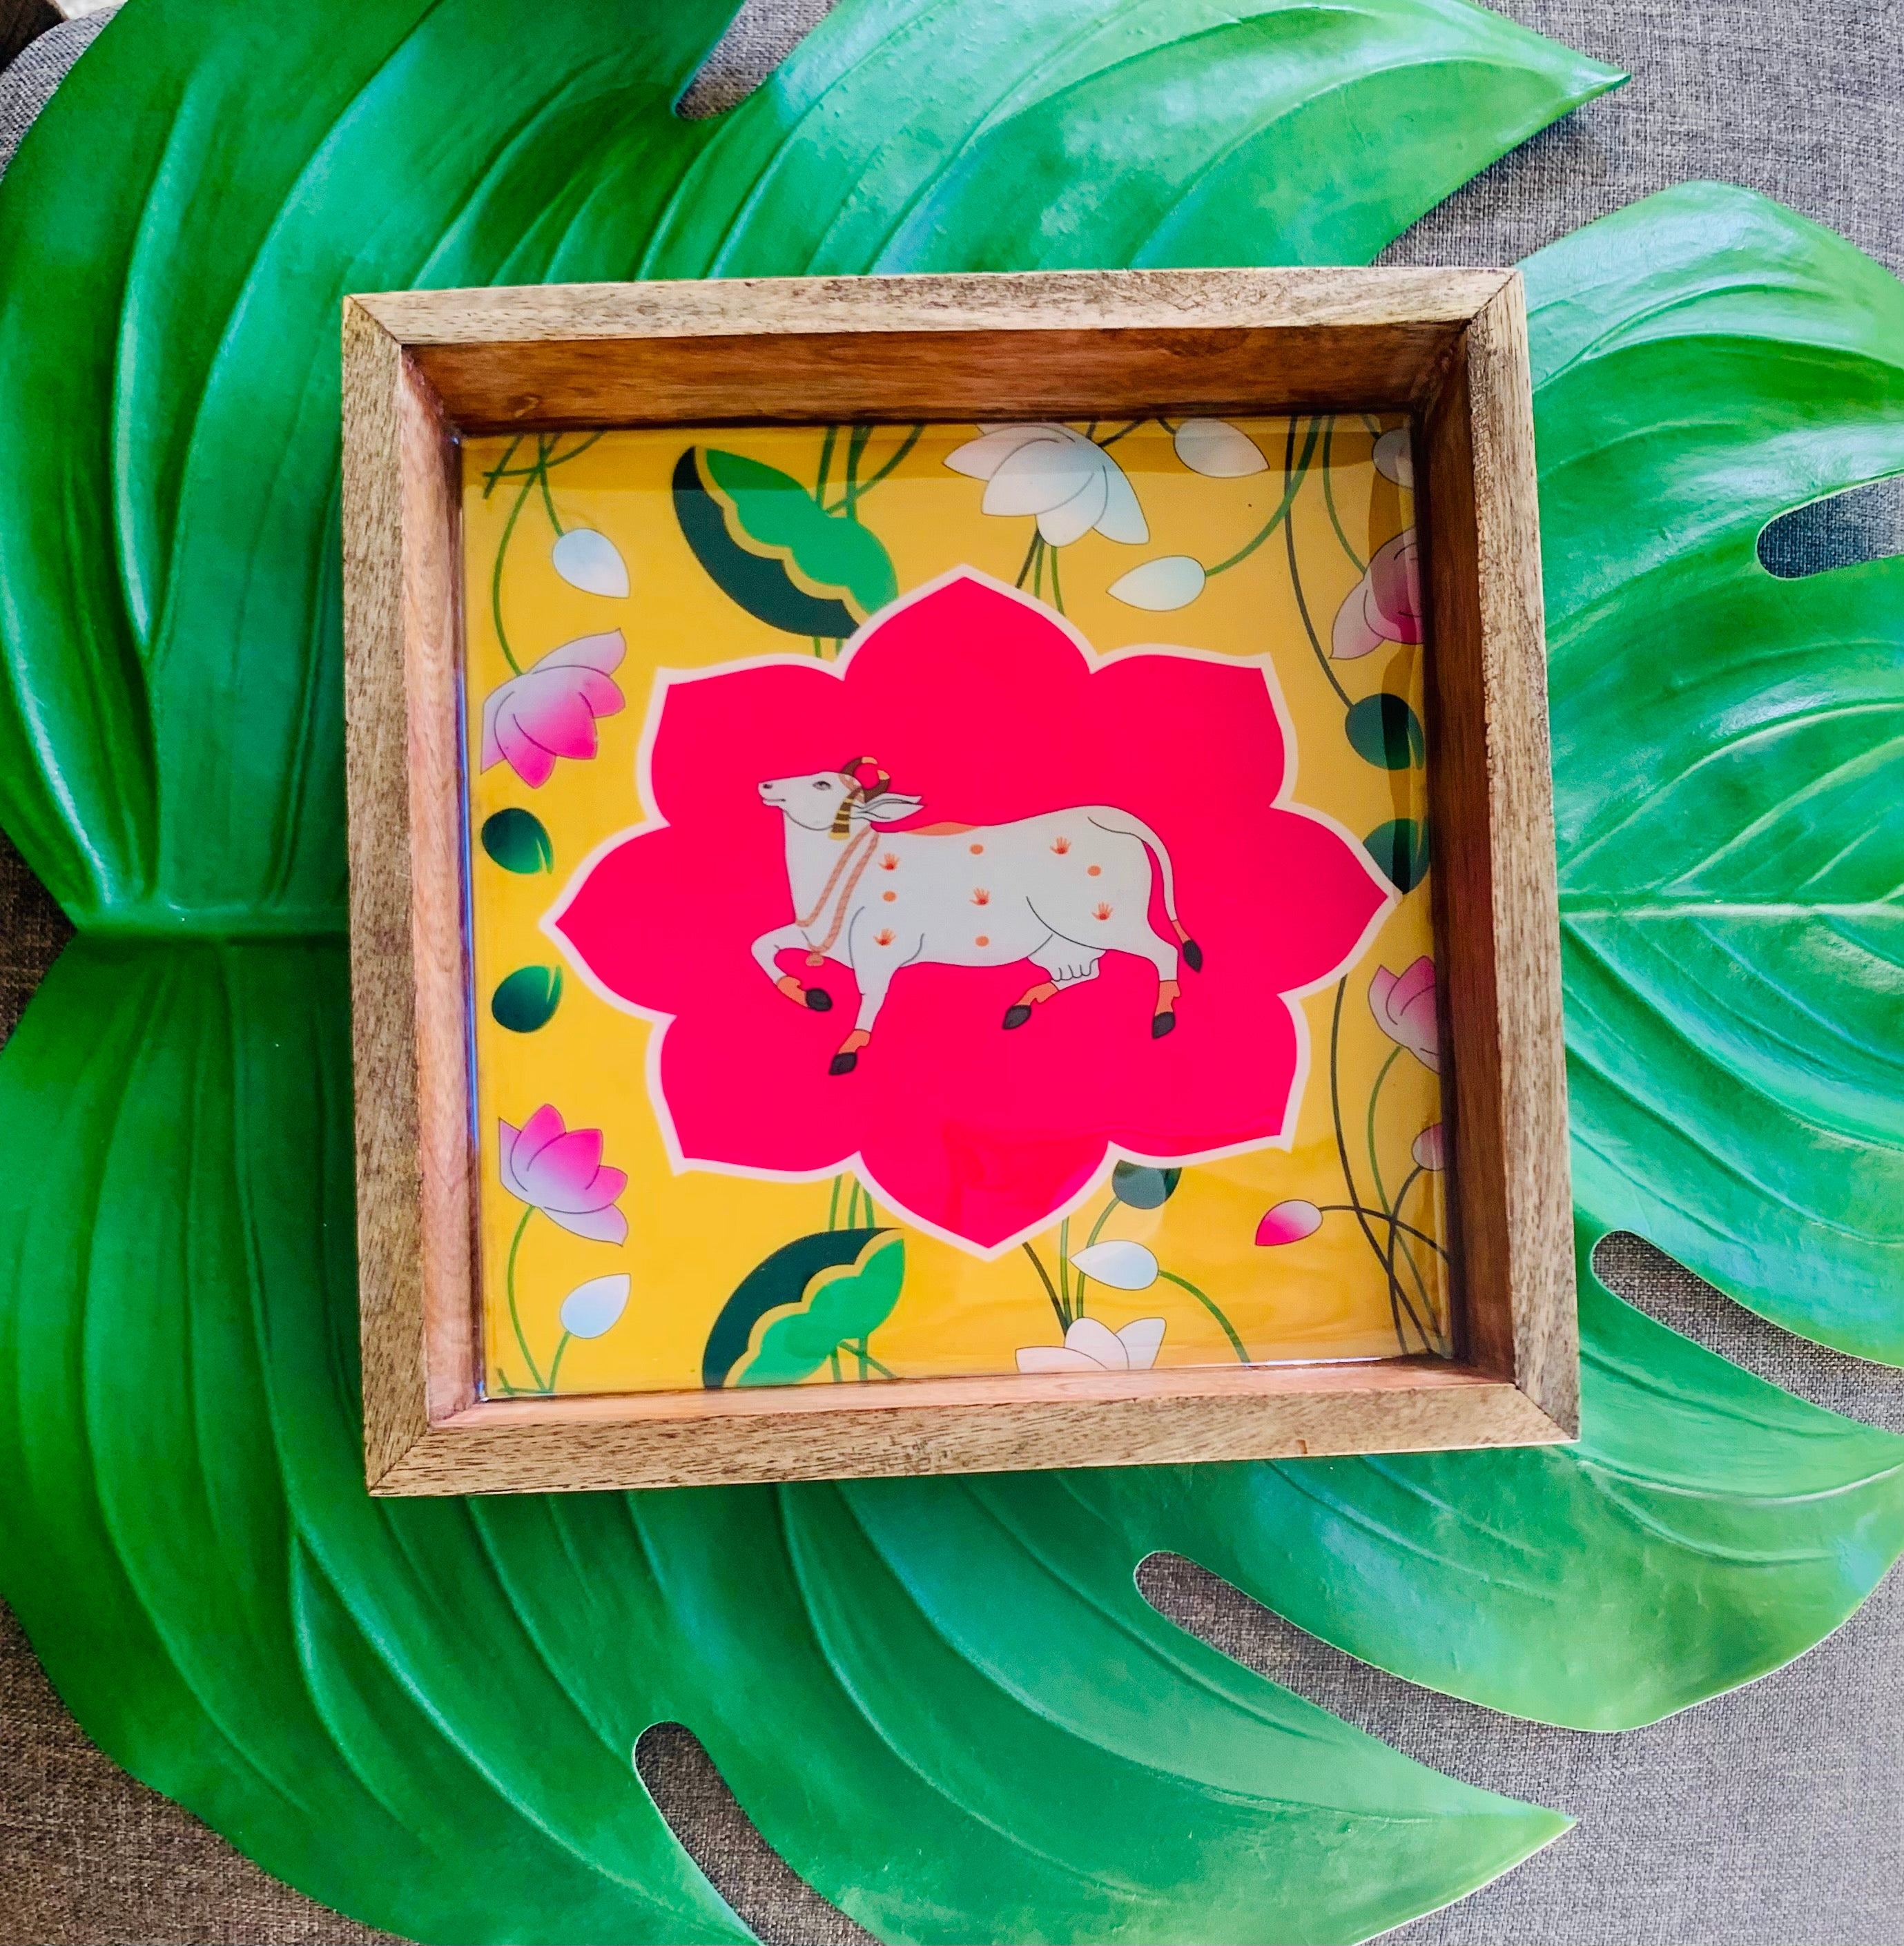 Wooden tray for Indian traditional events and pooja ceremonies